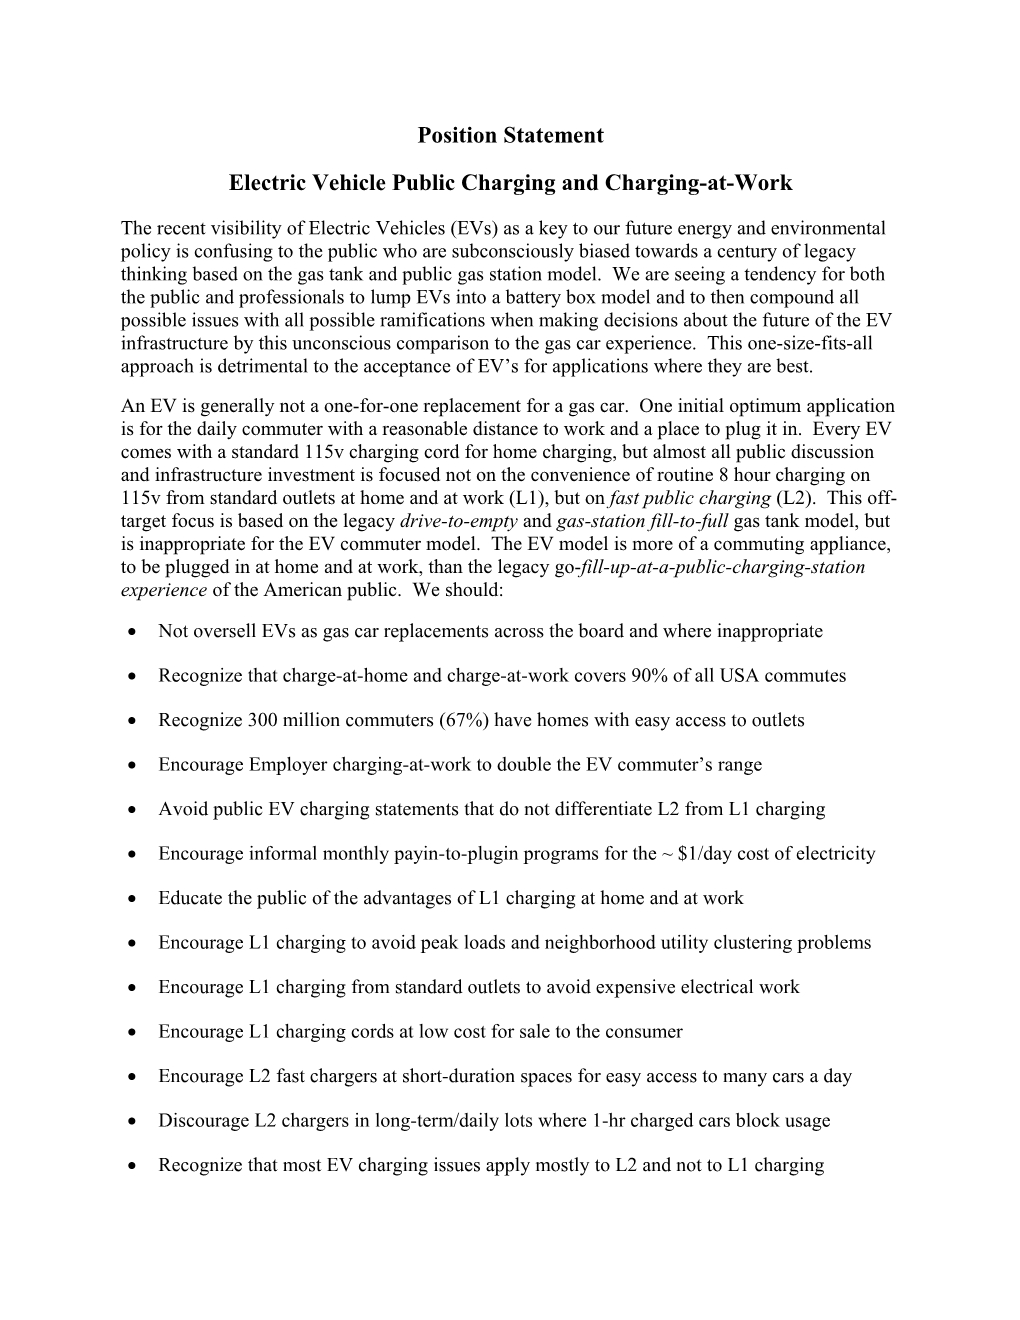 Electric Vehicle Public Charging and Charging-At-Work